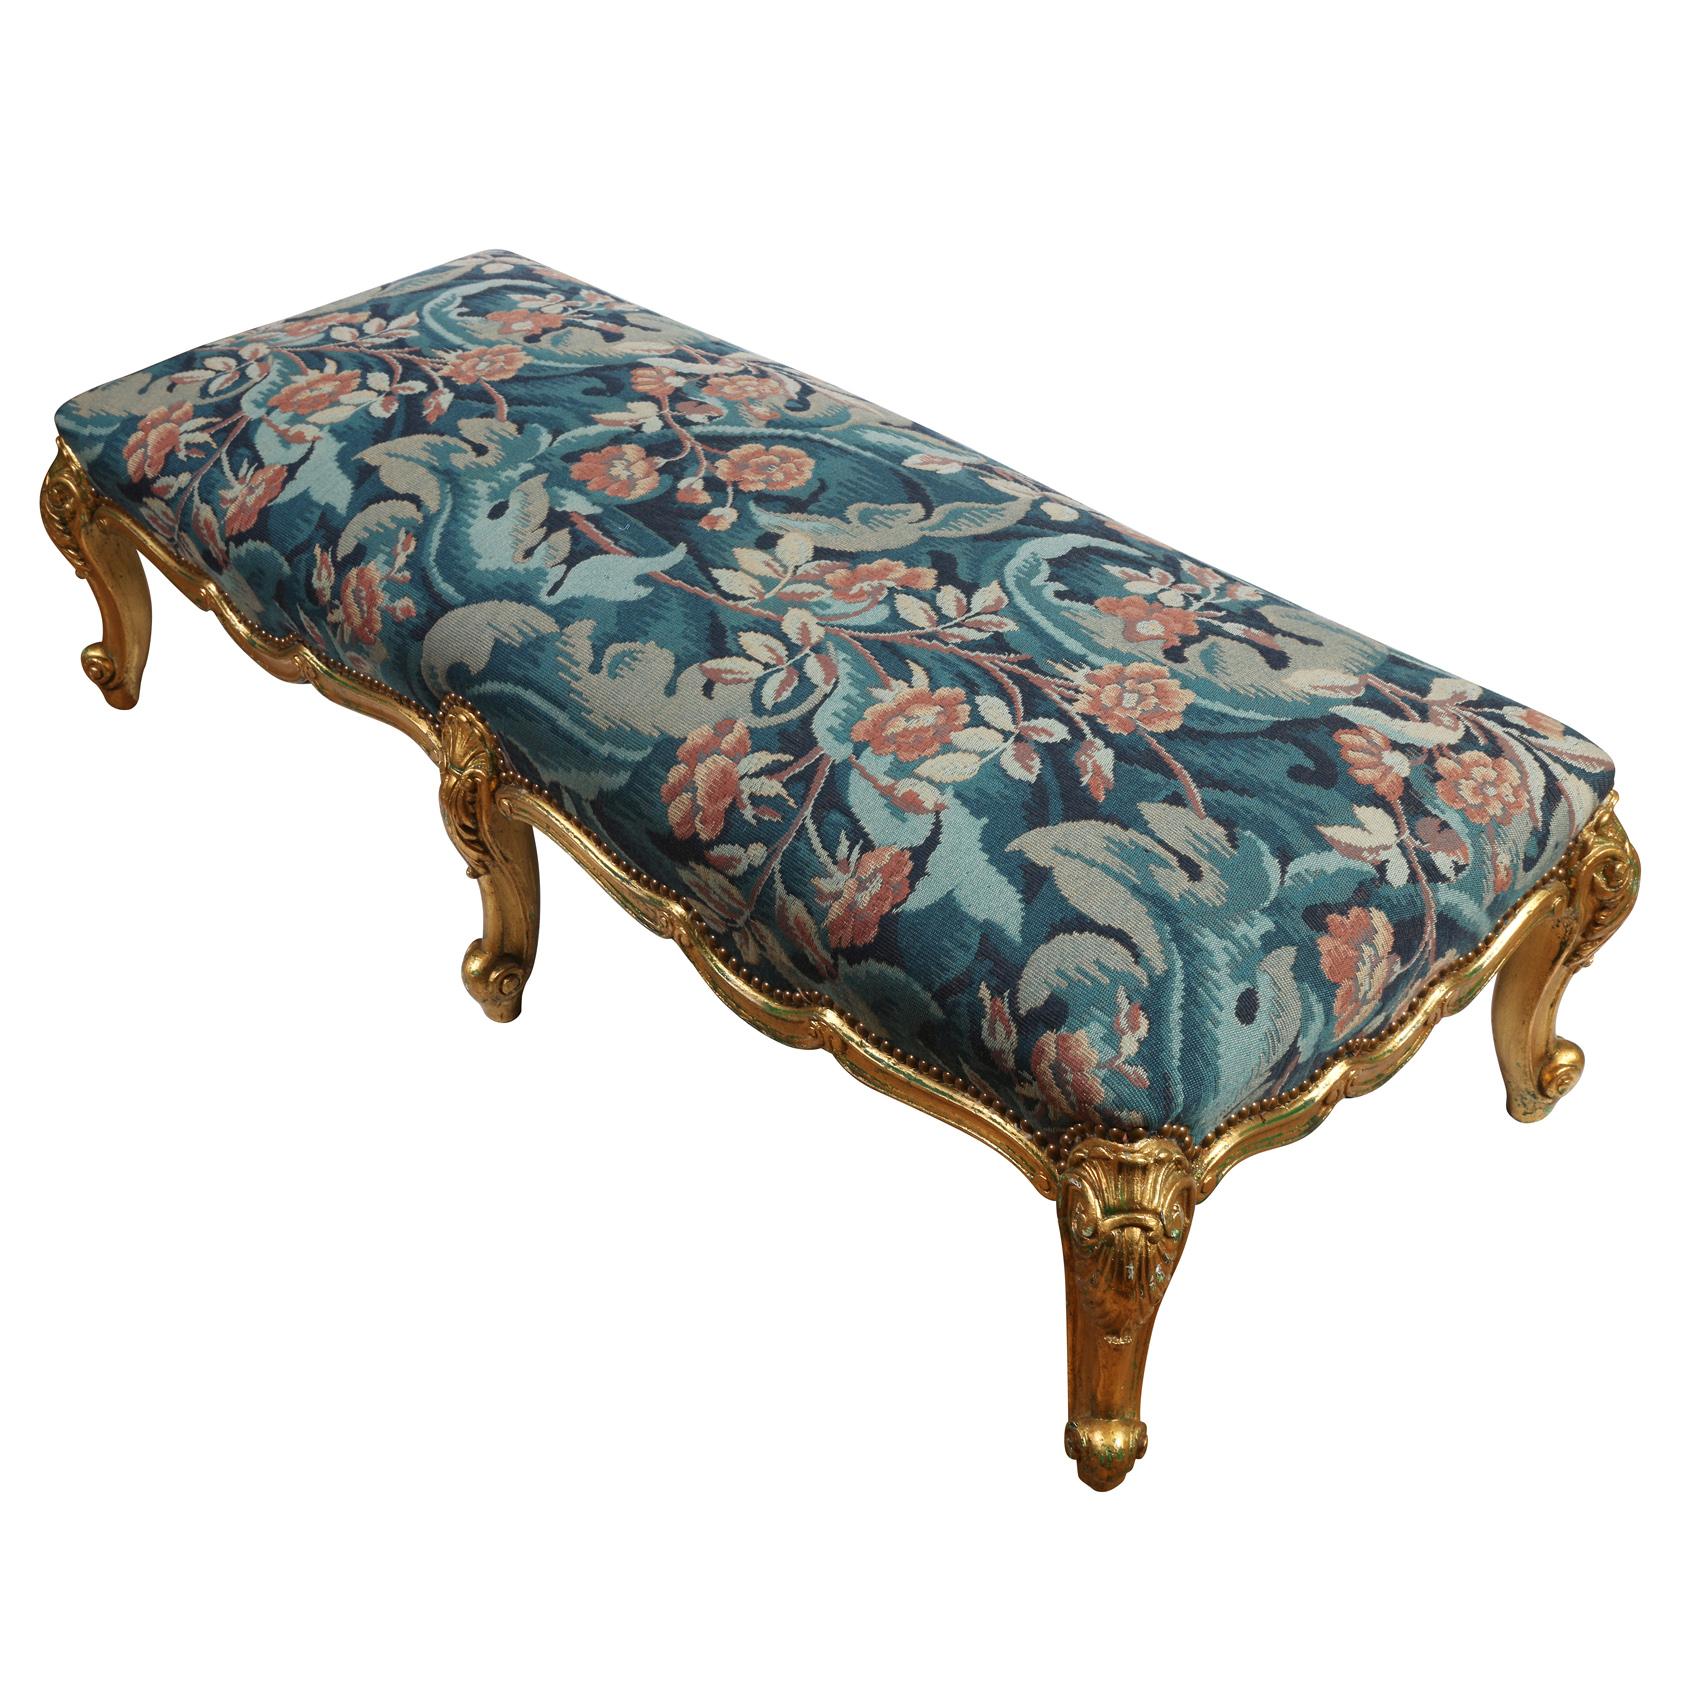 A Louis XV style oversized giltwood carved bench with six legs and upholstered in blue tapestry fabric with leaves and coral flowers.